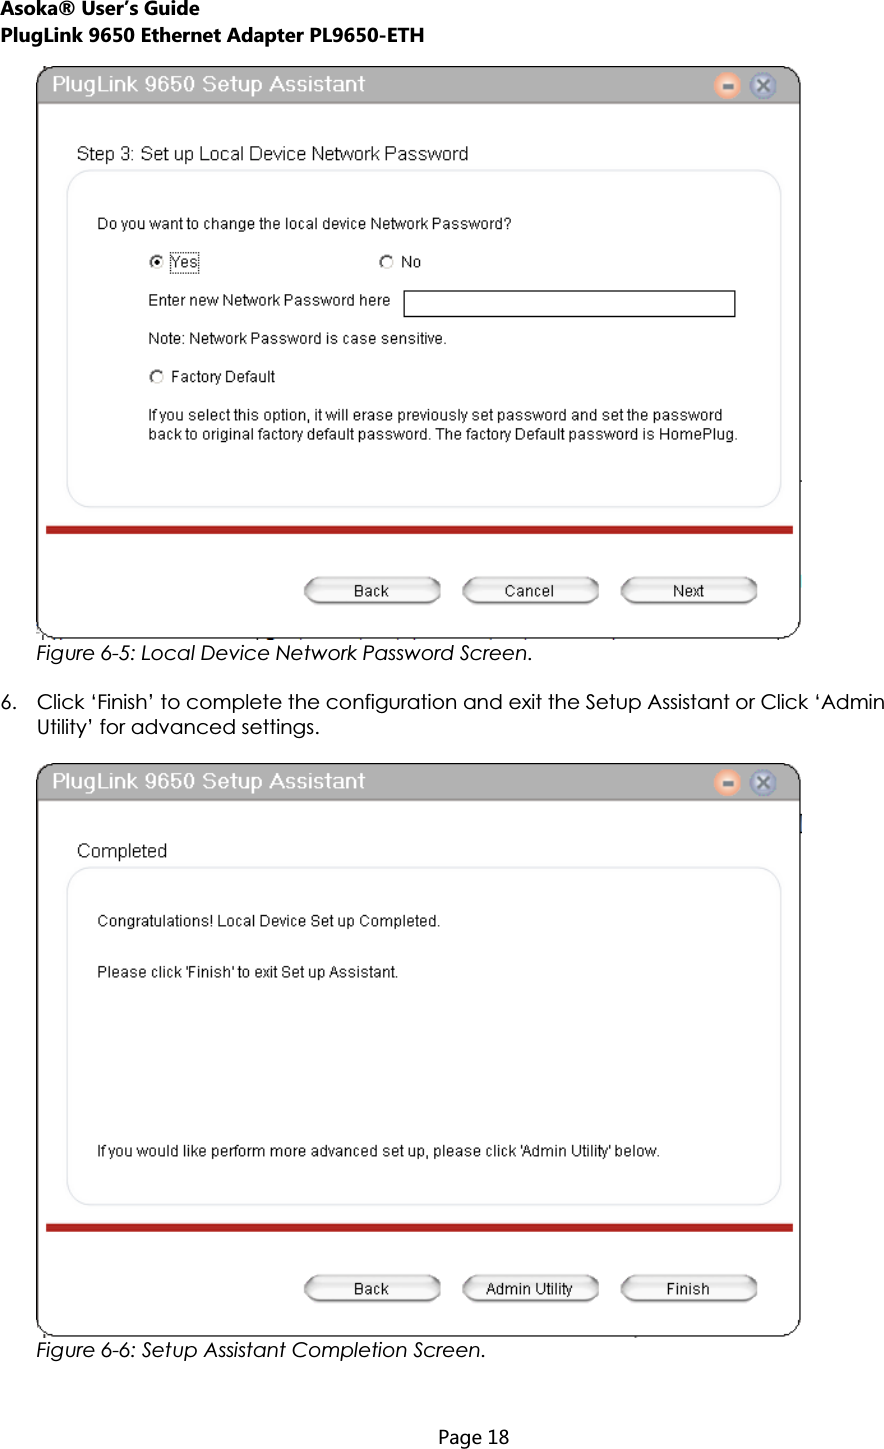 Asoka® User’s Guide PlugLink 9650 Ethernet Adapter PL9650-ETH  Page 18  Figure 6-5: Local Device Network Password Screen. 6. Click ‘Finish’ to complete the configuration and exit the Setup Assistant or Click ‘Admin Utility’ for advanced settings. Figure 6-6: Setup Assistant Completion Screen. 